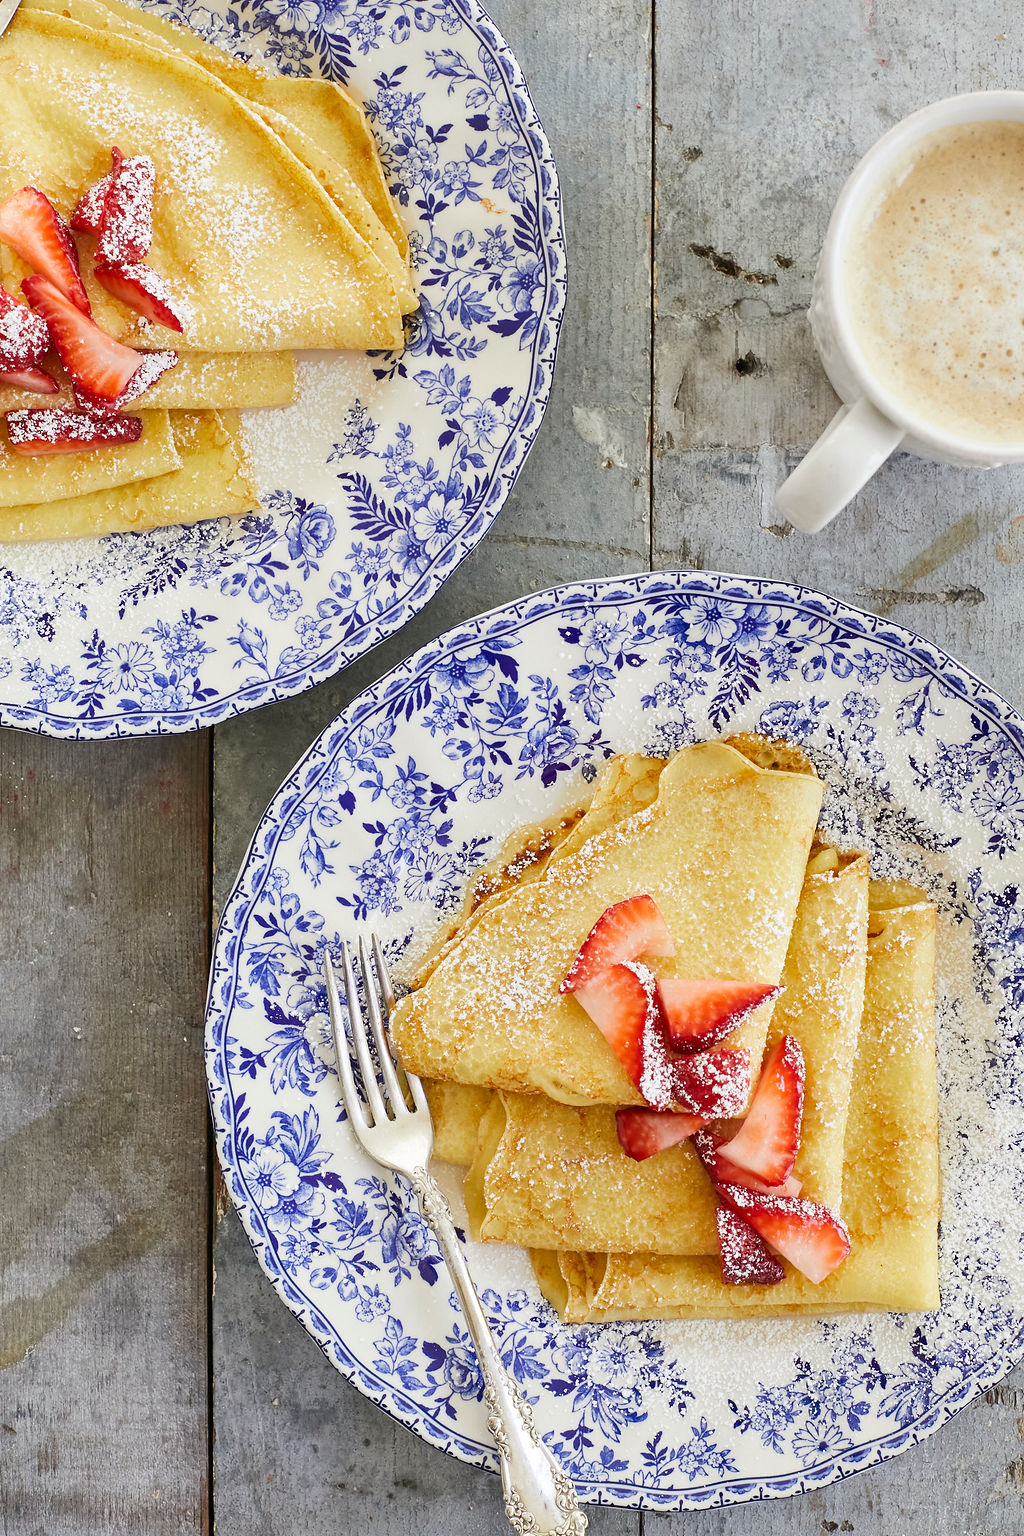 My Crepes recipe dusted in powdered sugar and topped with strawberries.